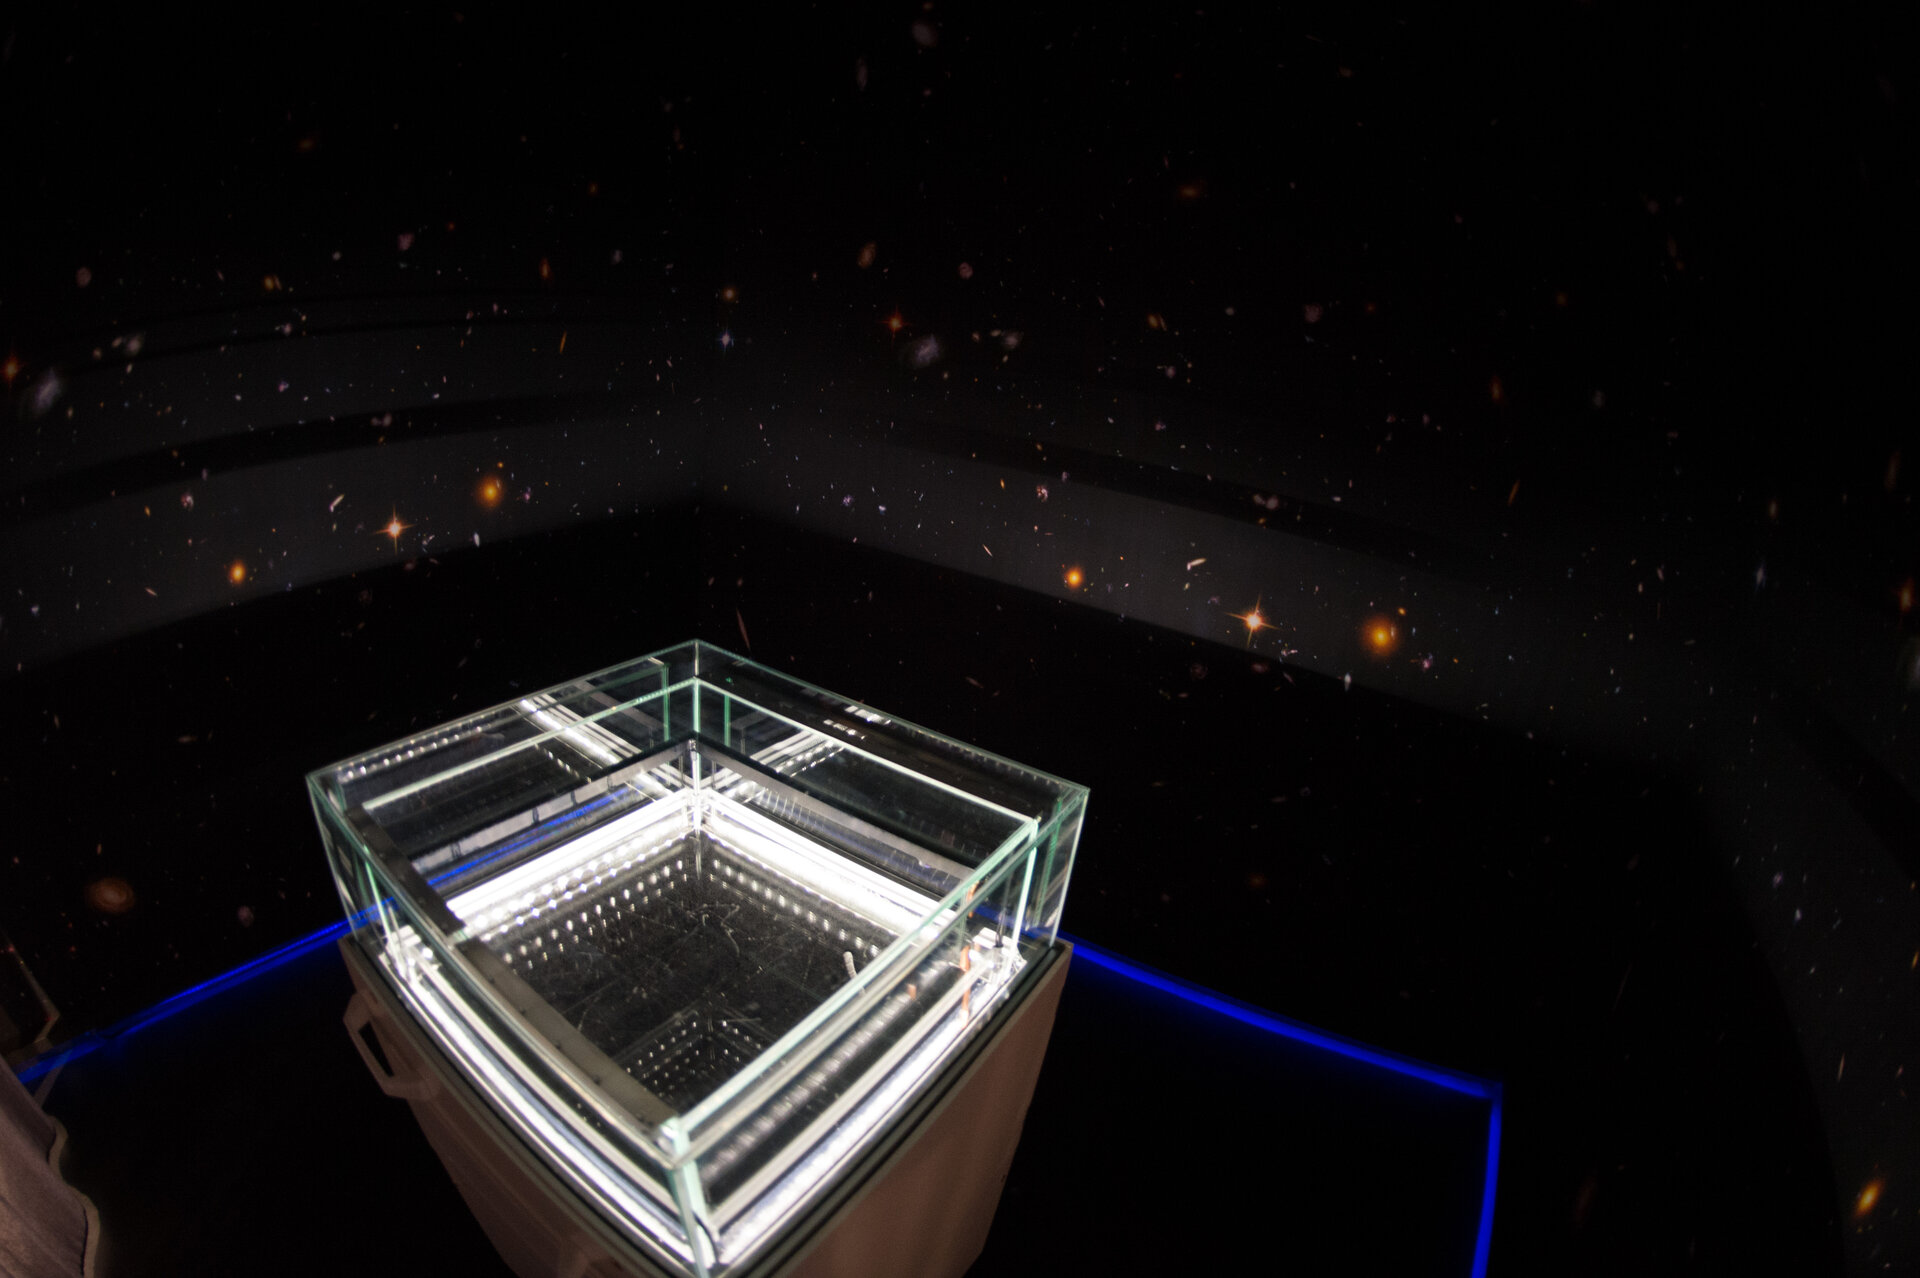 Cloud chamber at Le Bourget